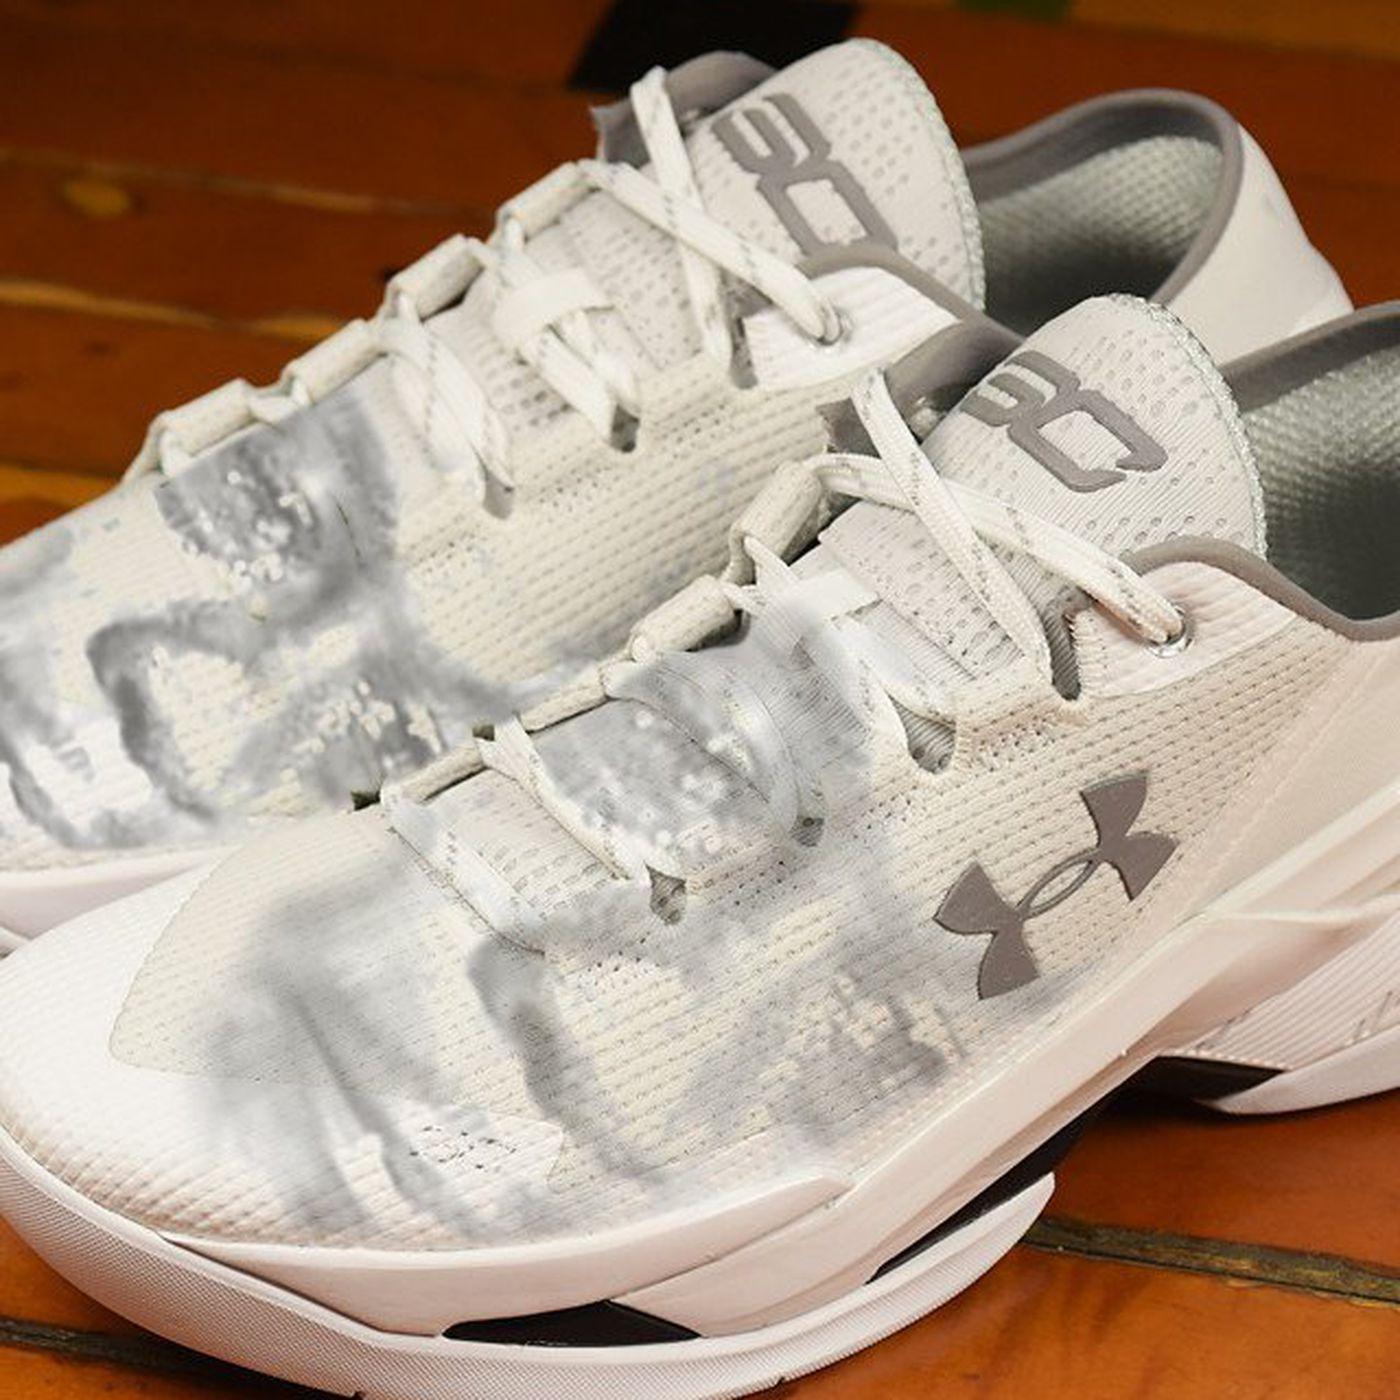 Steph Curry released some ugly shoes and people are ruthlessly